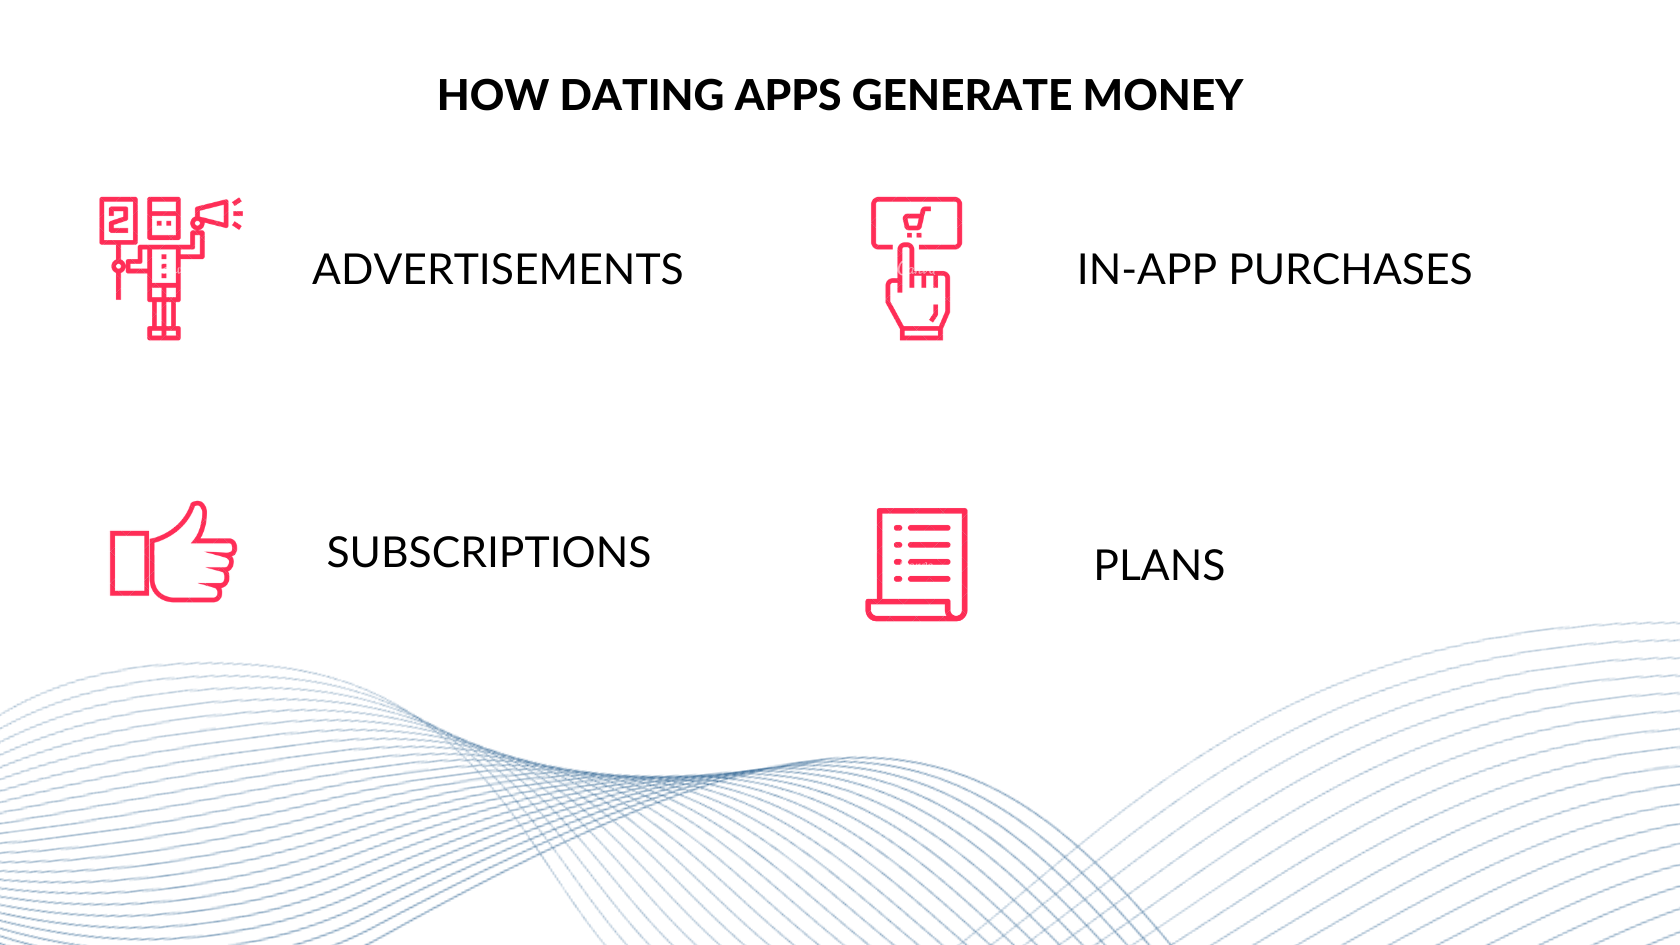 How dating apps generate money